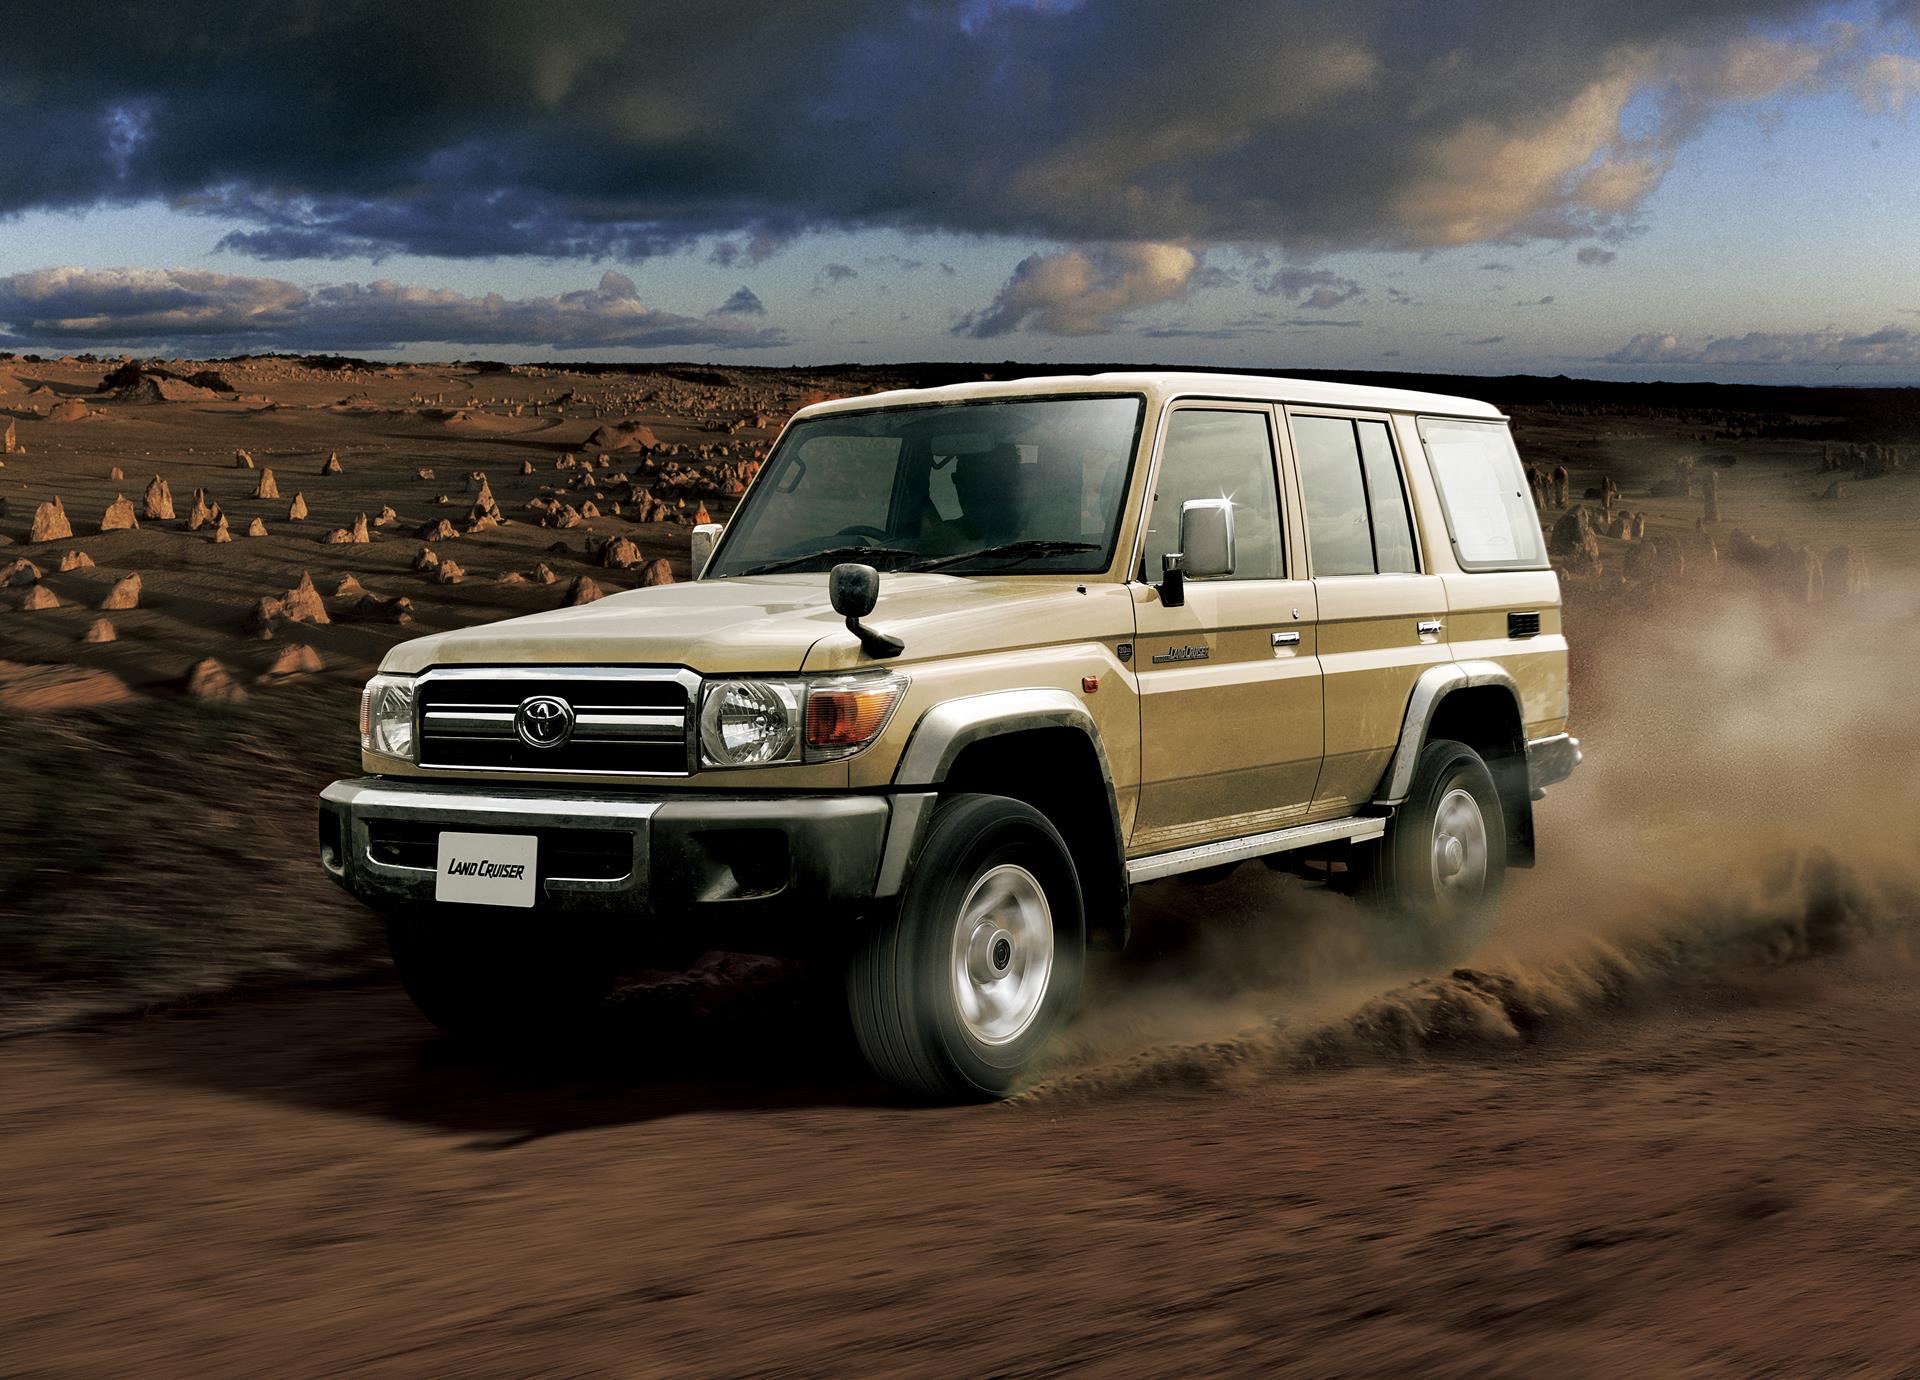 30 Years Of Toyota Land Cruiser 70 Celebrating With Limited Edition Models autoevolution